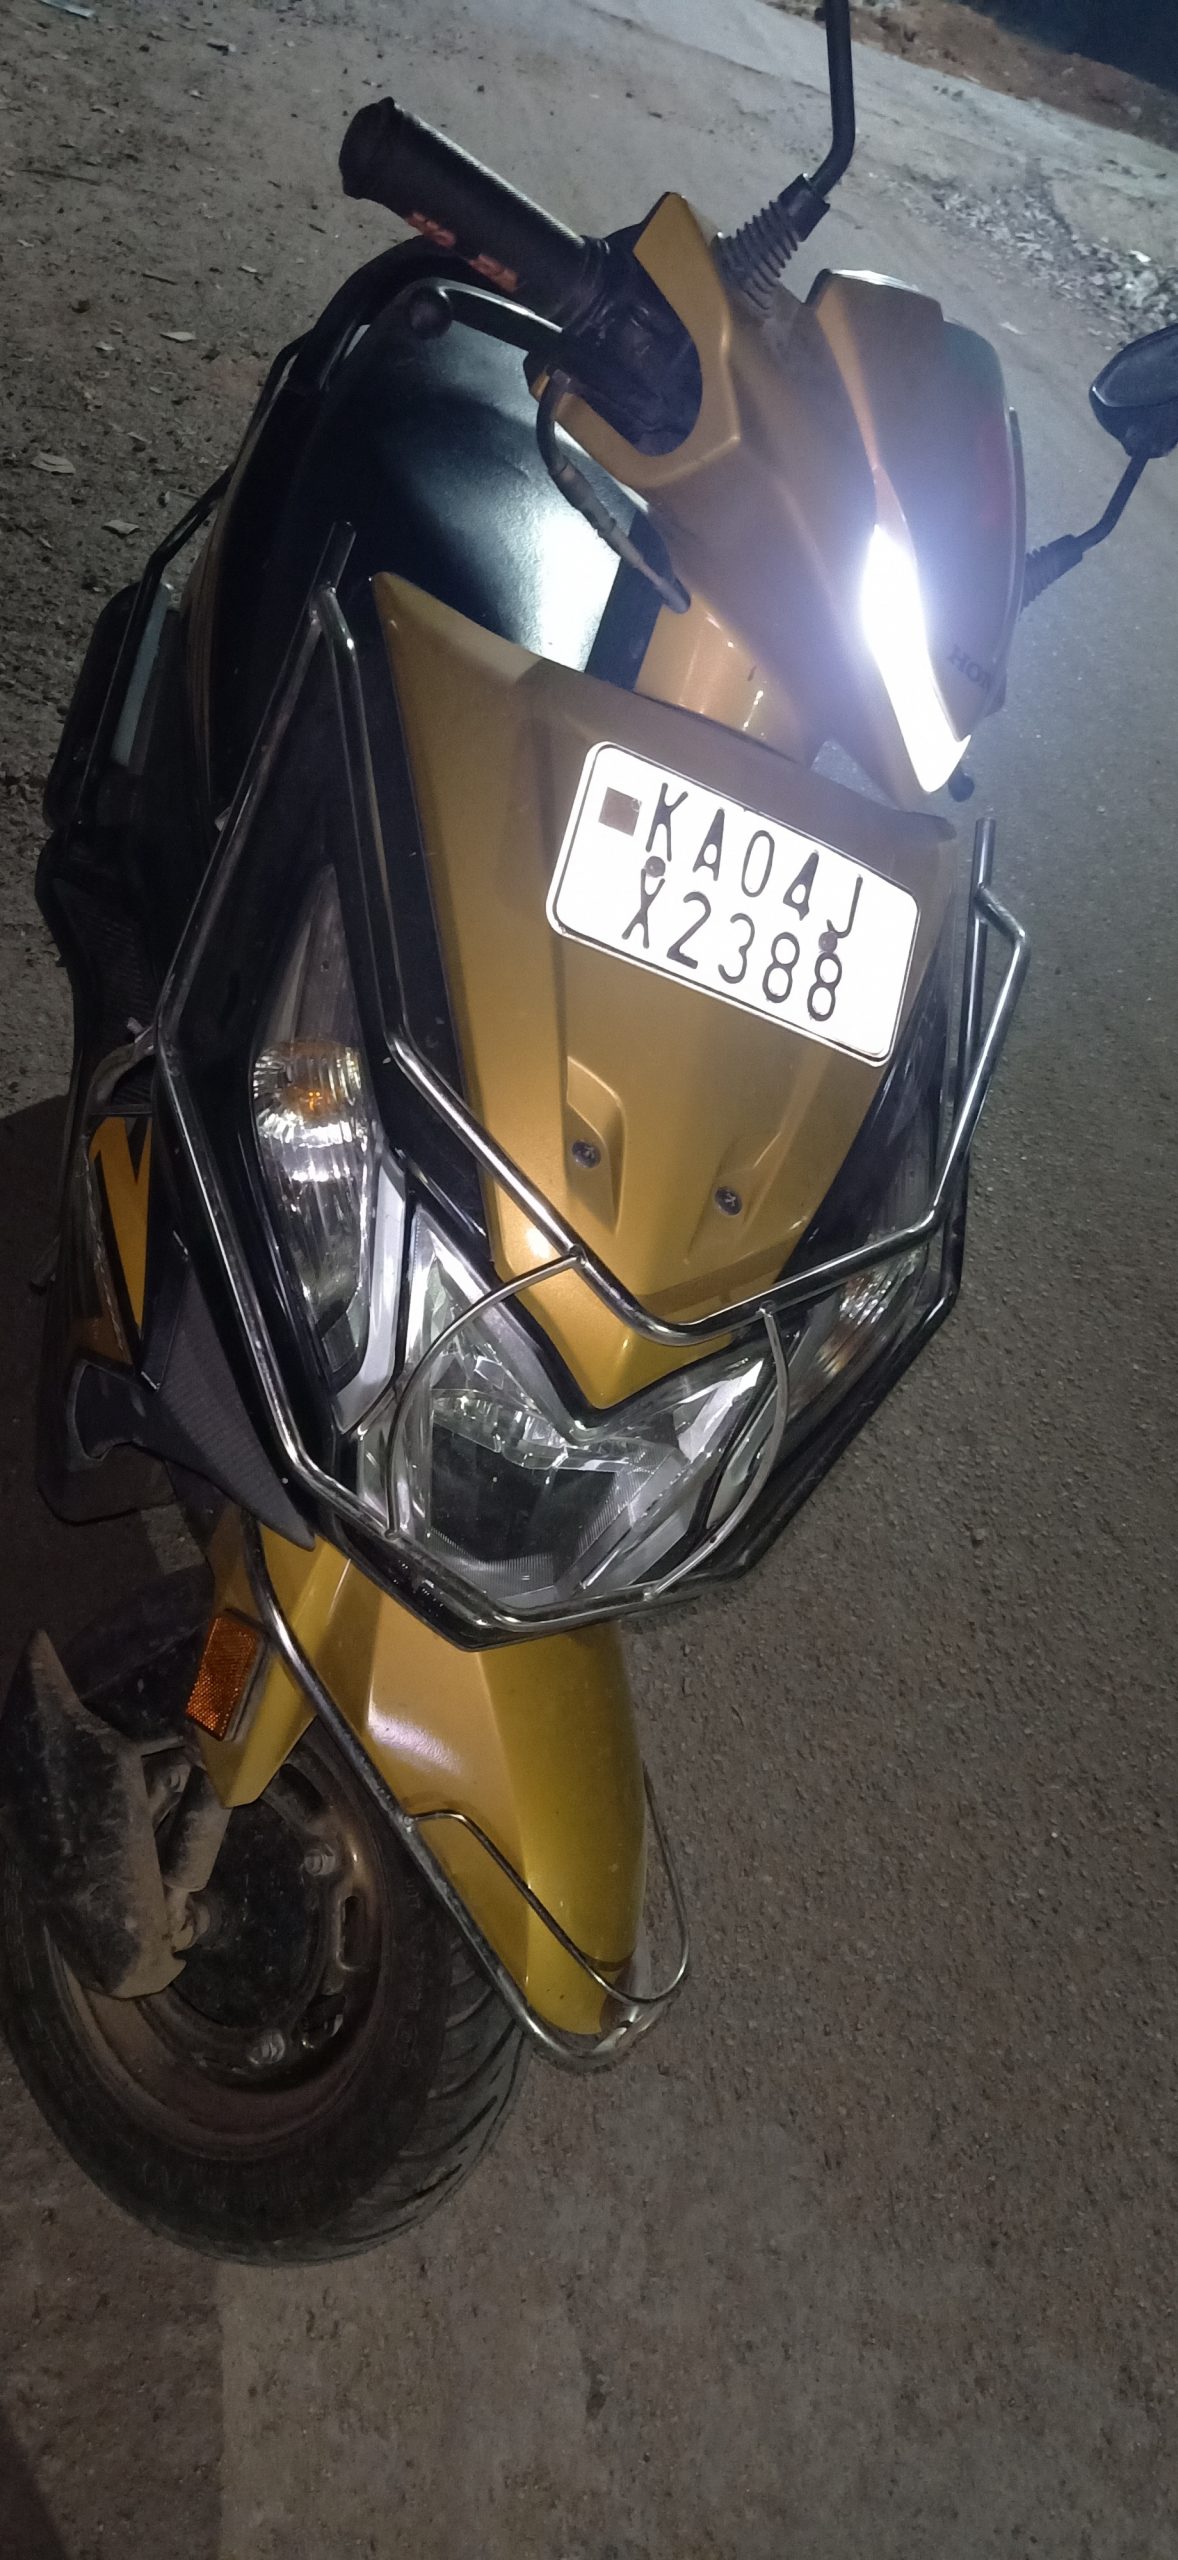 MY Honda activa for sell urgent need money good condition